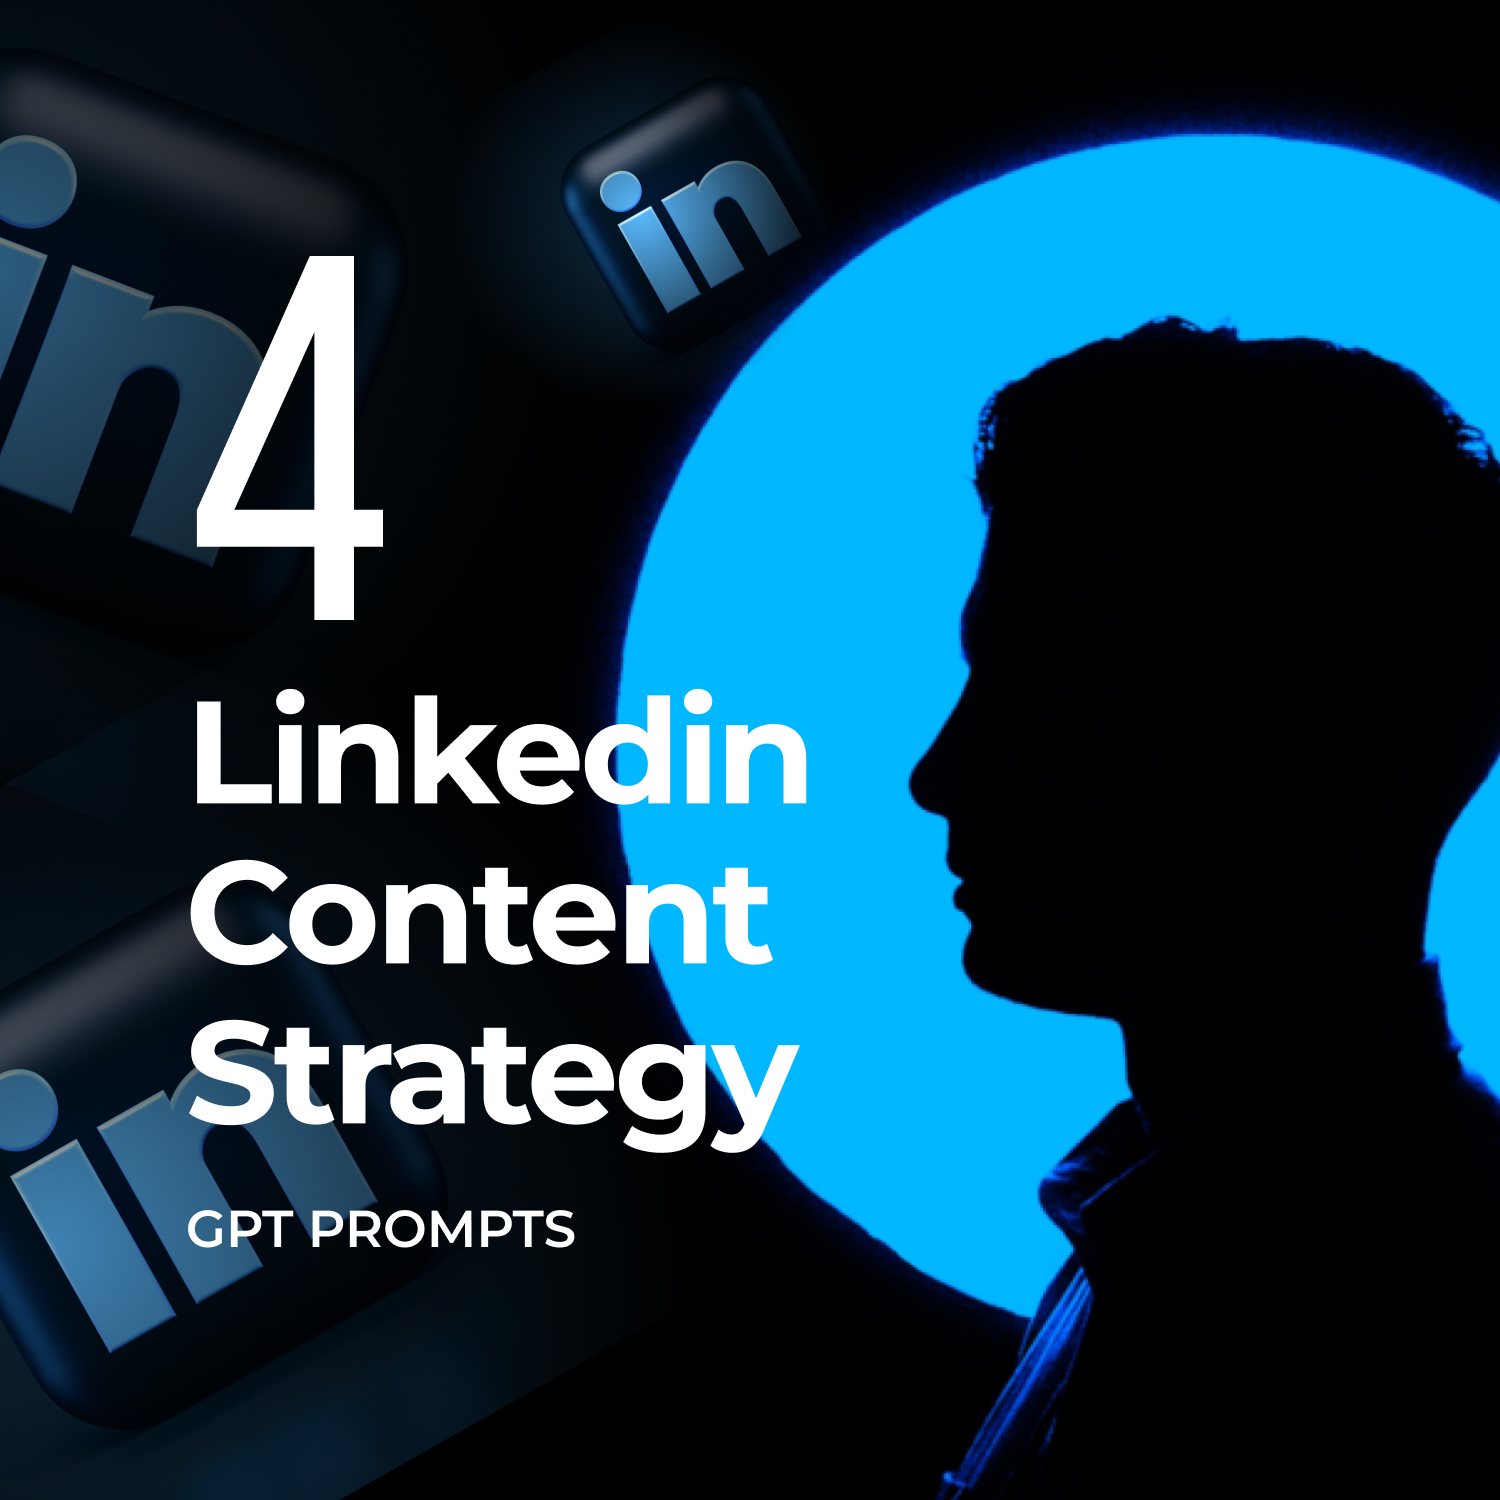 4 linkedin content strategy gpt prompts 794